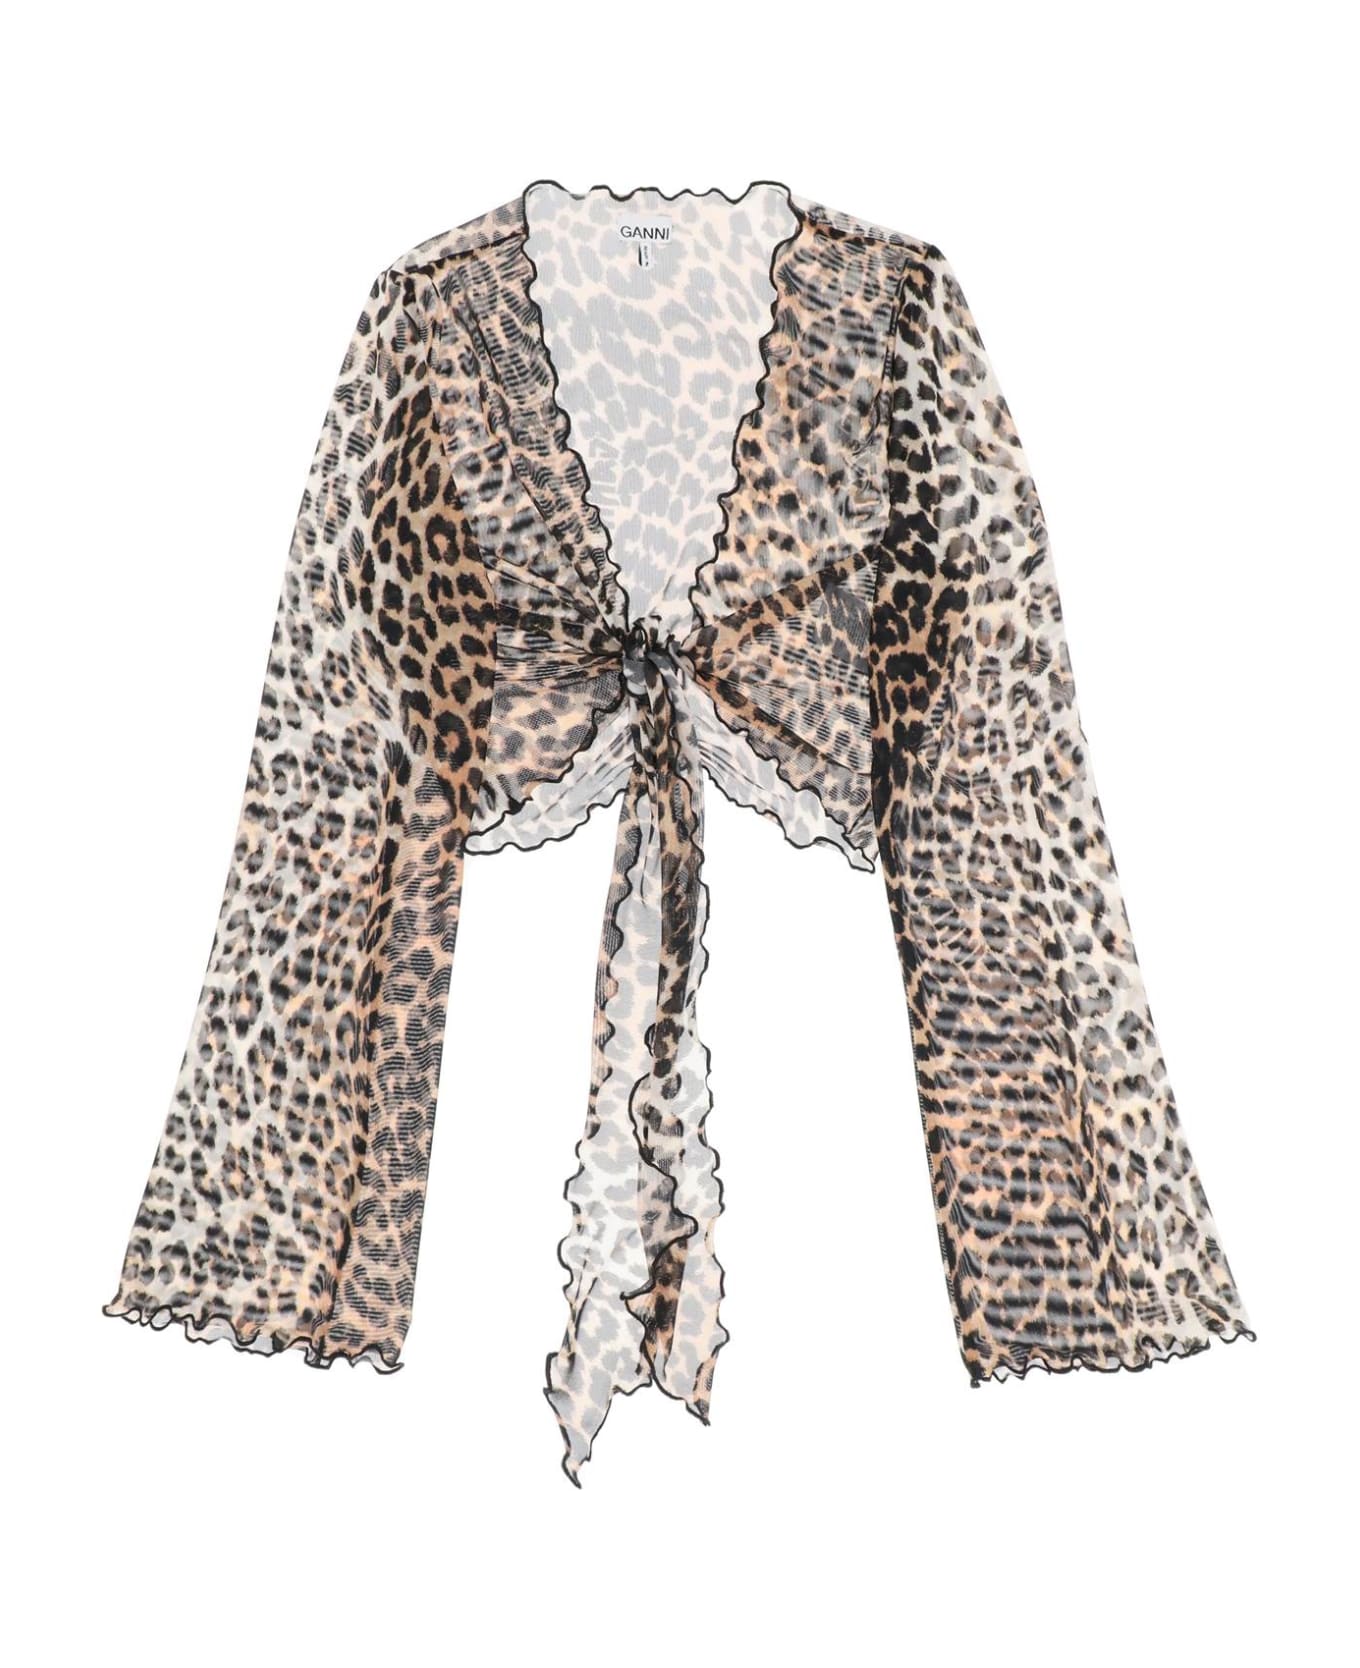 Ganni Cover Up Cropped Top In Mesh With Leopard Print - LEOPARD (Beige)